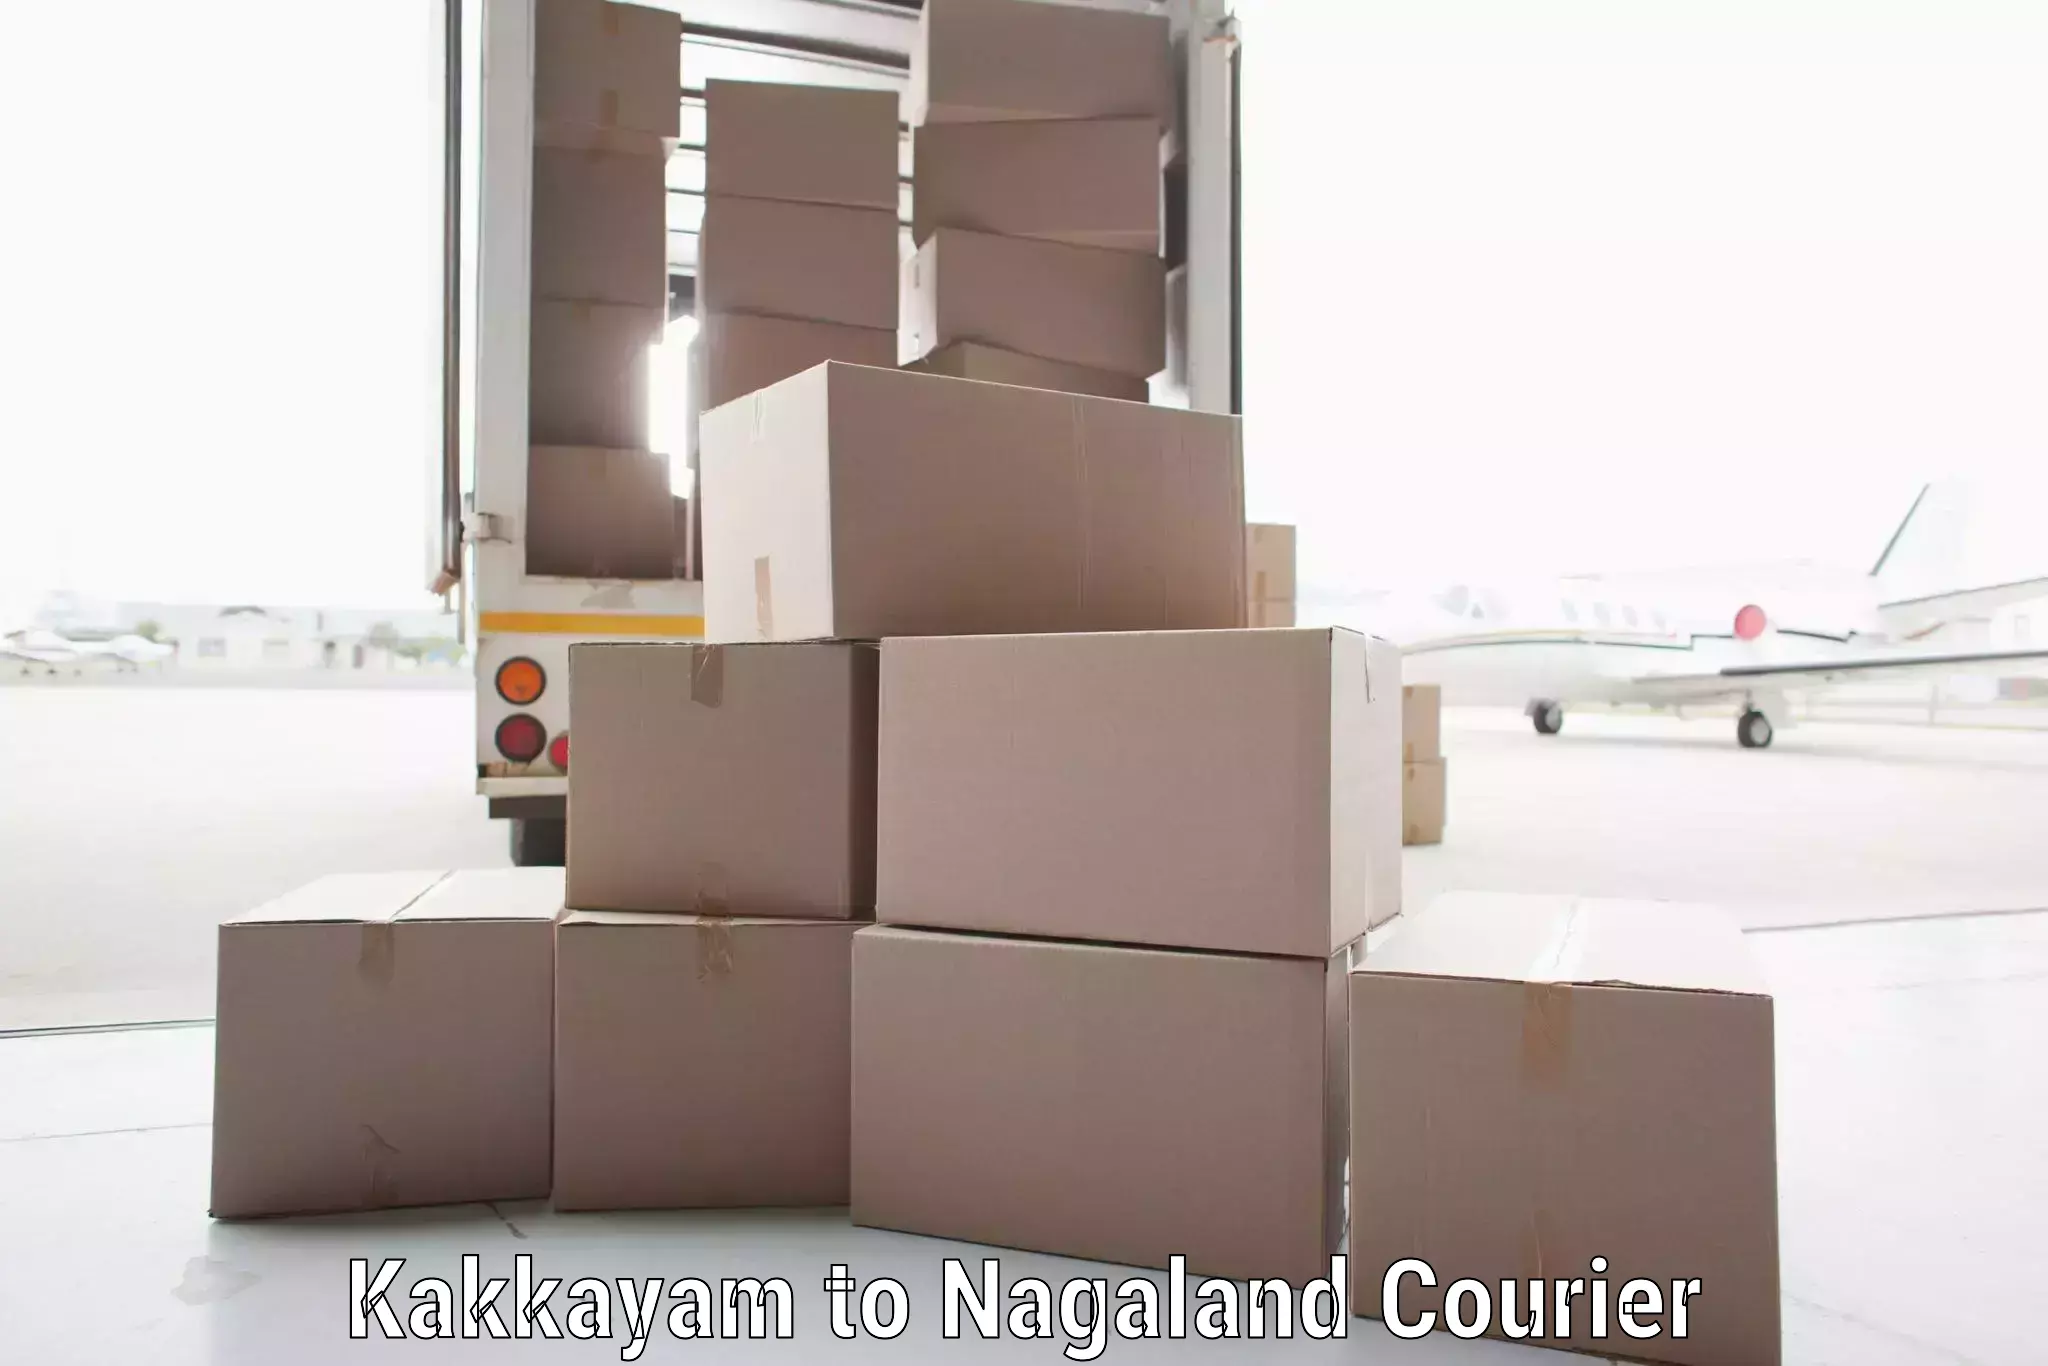 Courier service comparison in Kakkayam to Mon